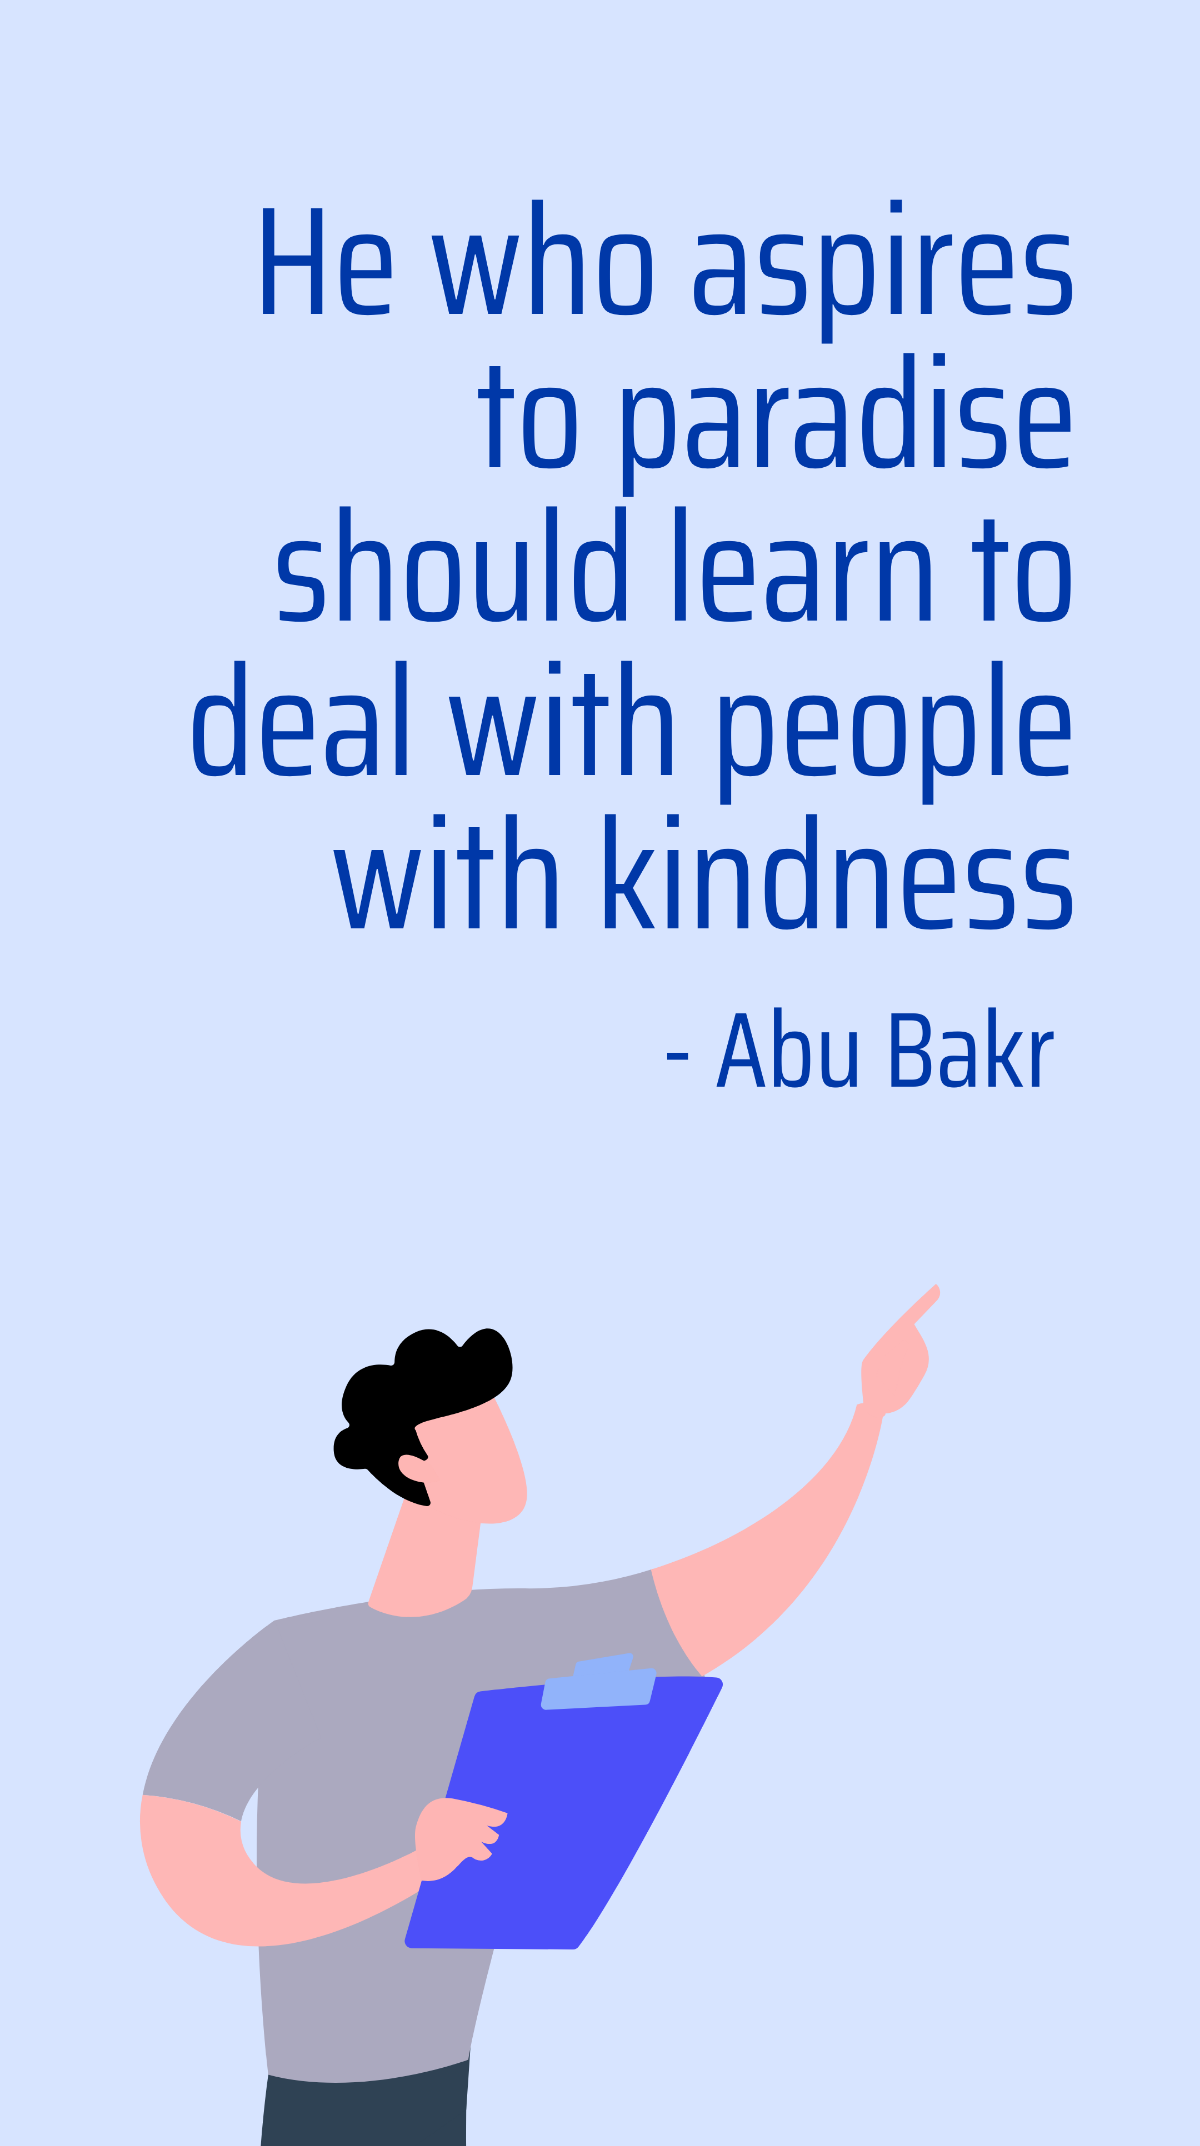 Free Abu Bakr - He who aspires to paradise should learn to deal with people with kindness Template